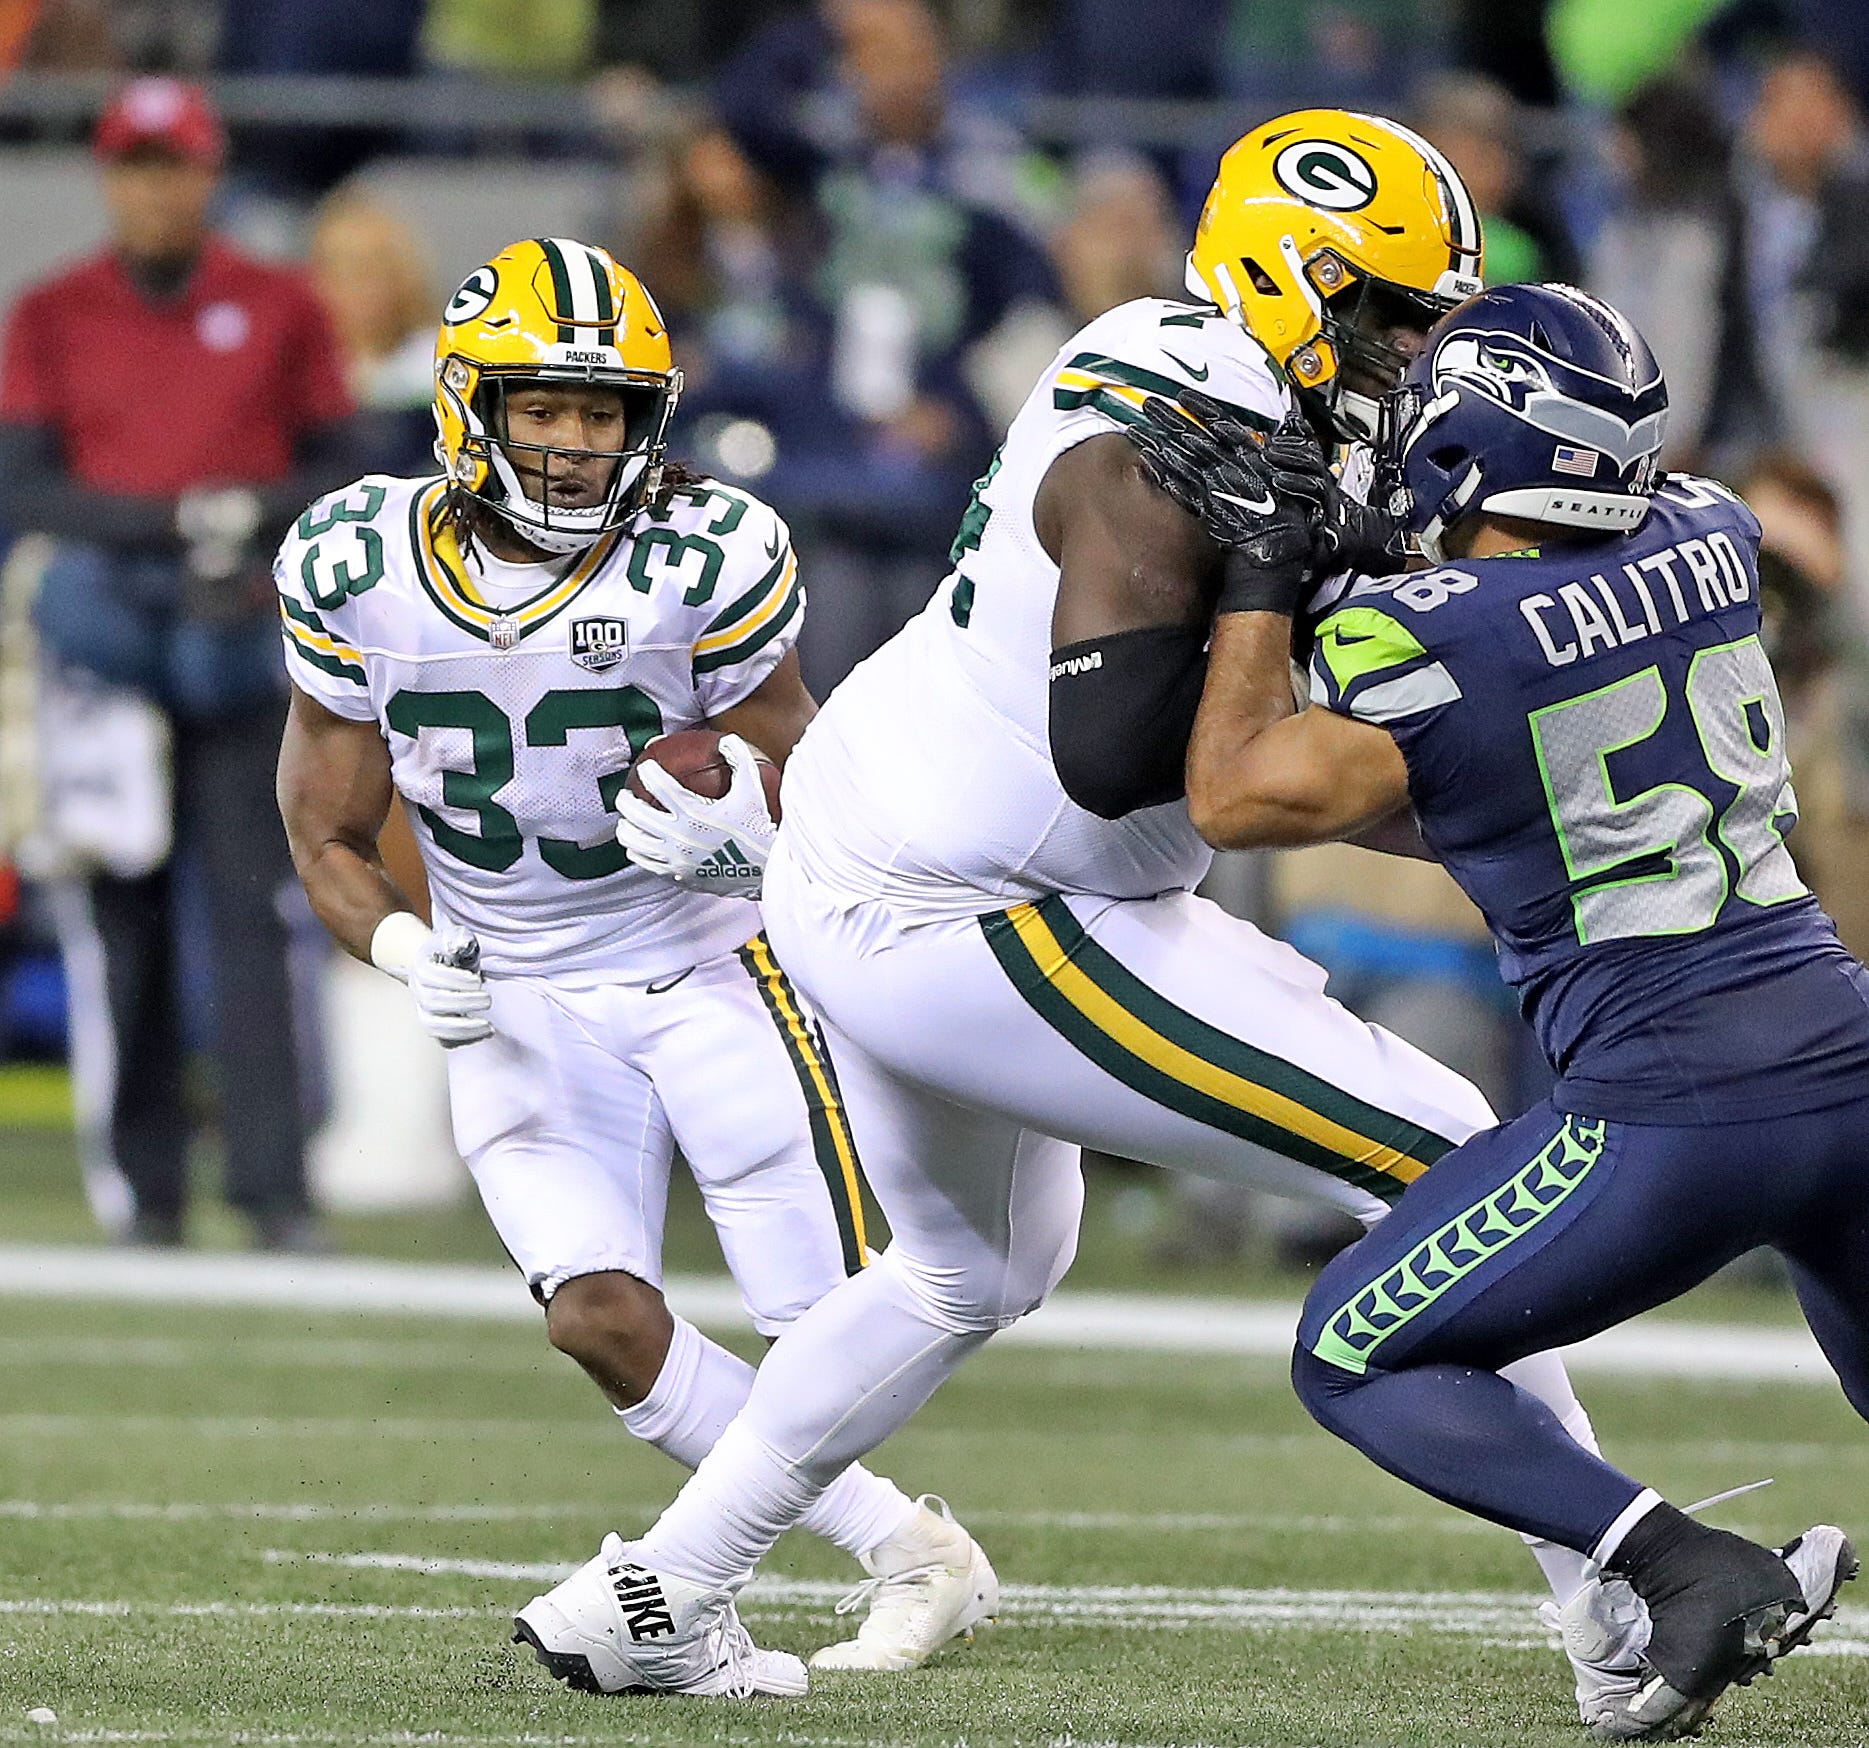 Green Bay Packers running back Aaron Jones (33) cuts behind the block of offensive guard Byron Bell (74) on outside linebacker Austin Calitro (58) on a screen pass against the Seattle Seahawks at CenturyLink Field Thursday, November 15, 2018 in Seattle, WA. Jim Matthews/USA TODAY NETWORK-Wis